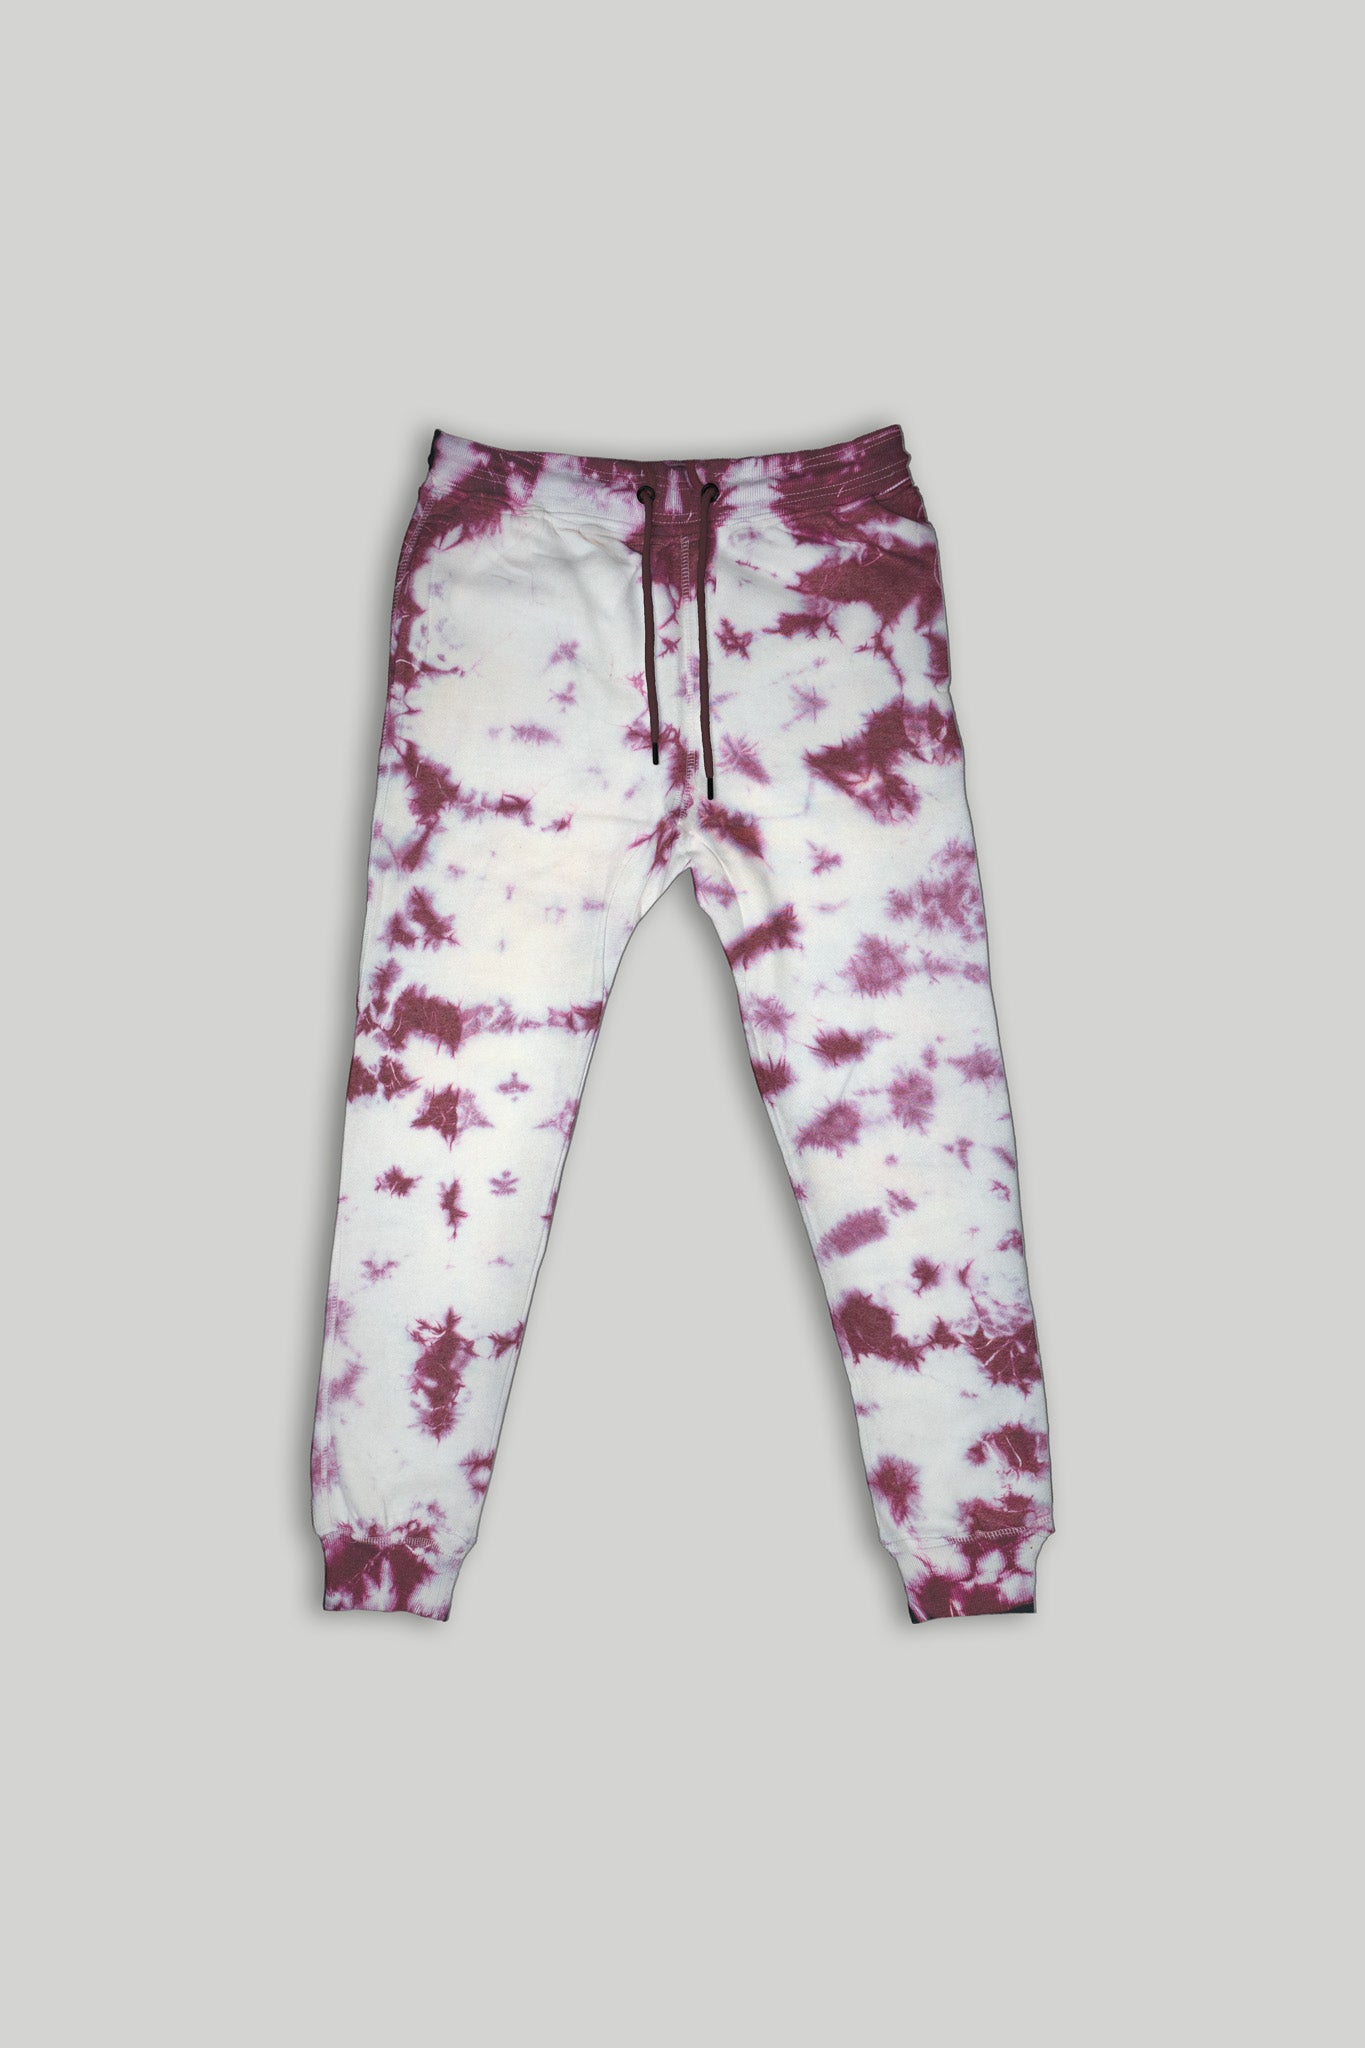 High quality fleece joggers are perfect for any season outfit.